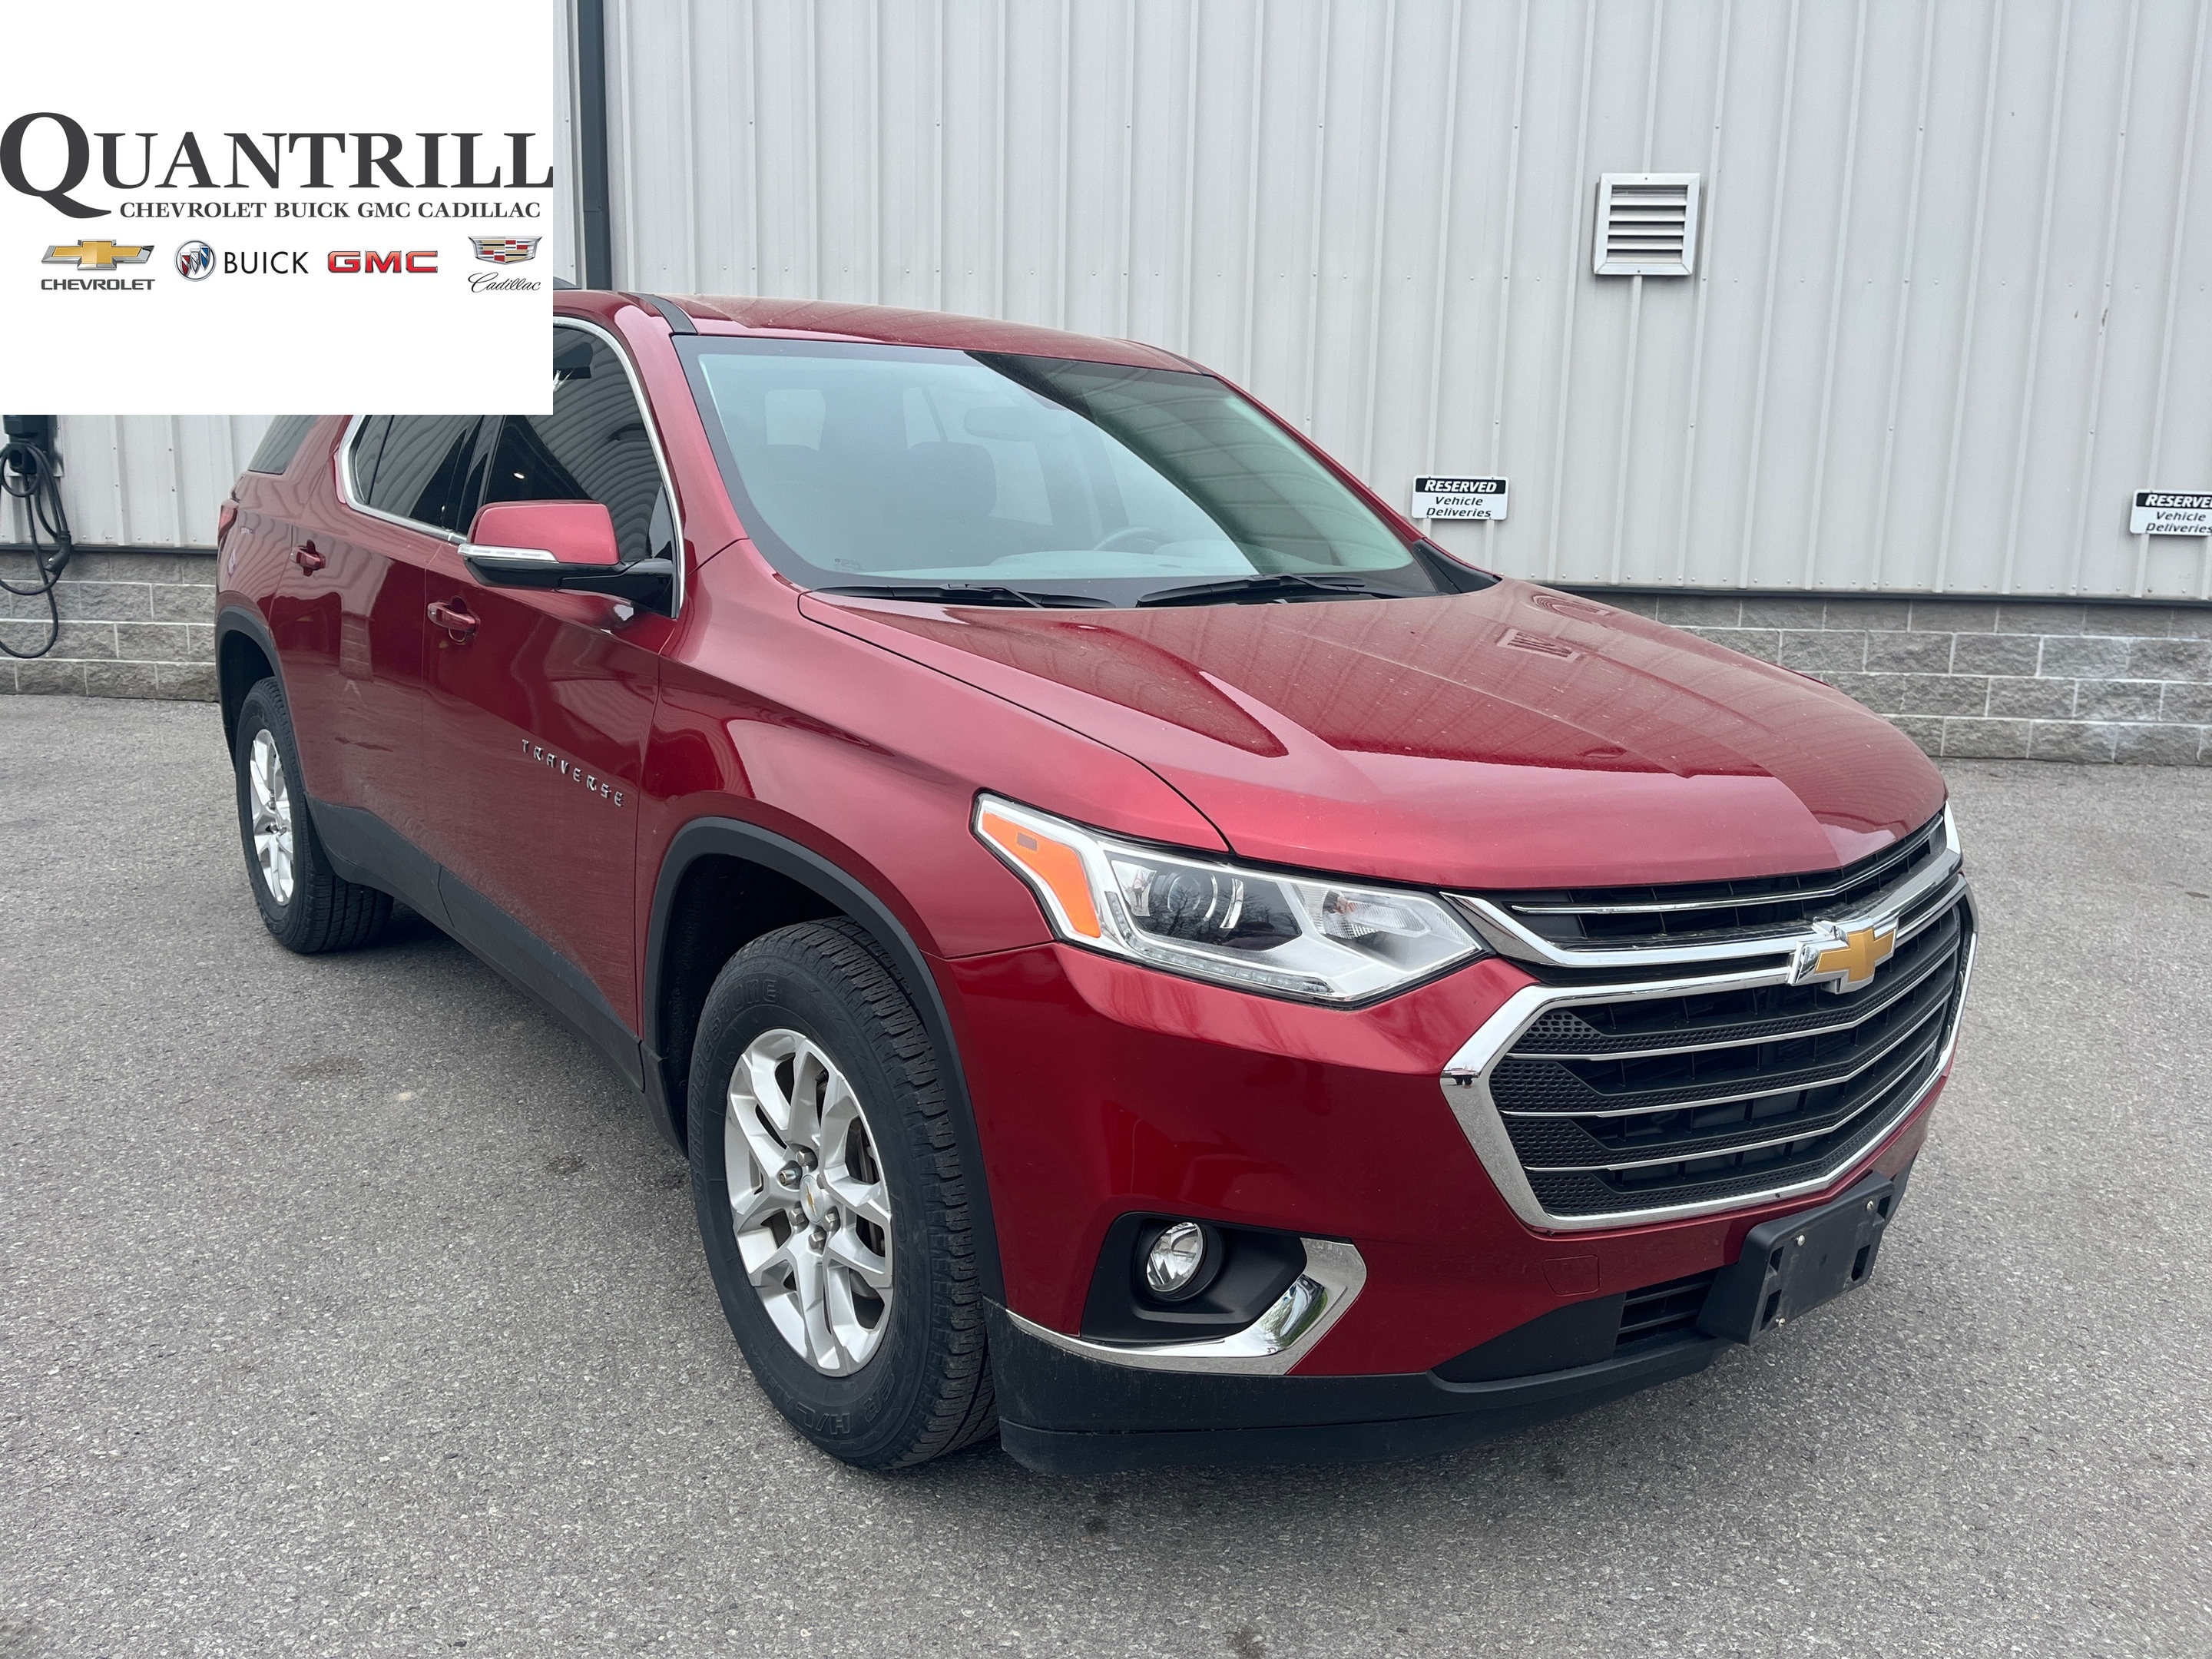 2018 Chevrolet Traverse Lt + 3.6L + Heated Seats + Tow Pkg + One Owner